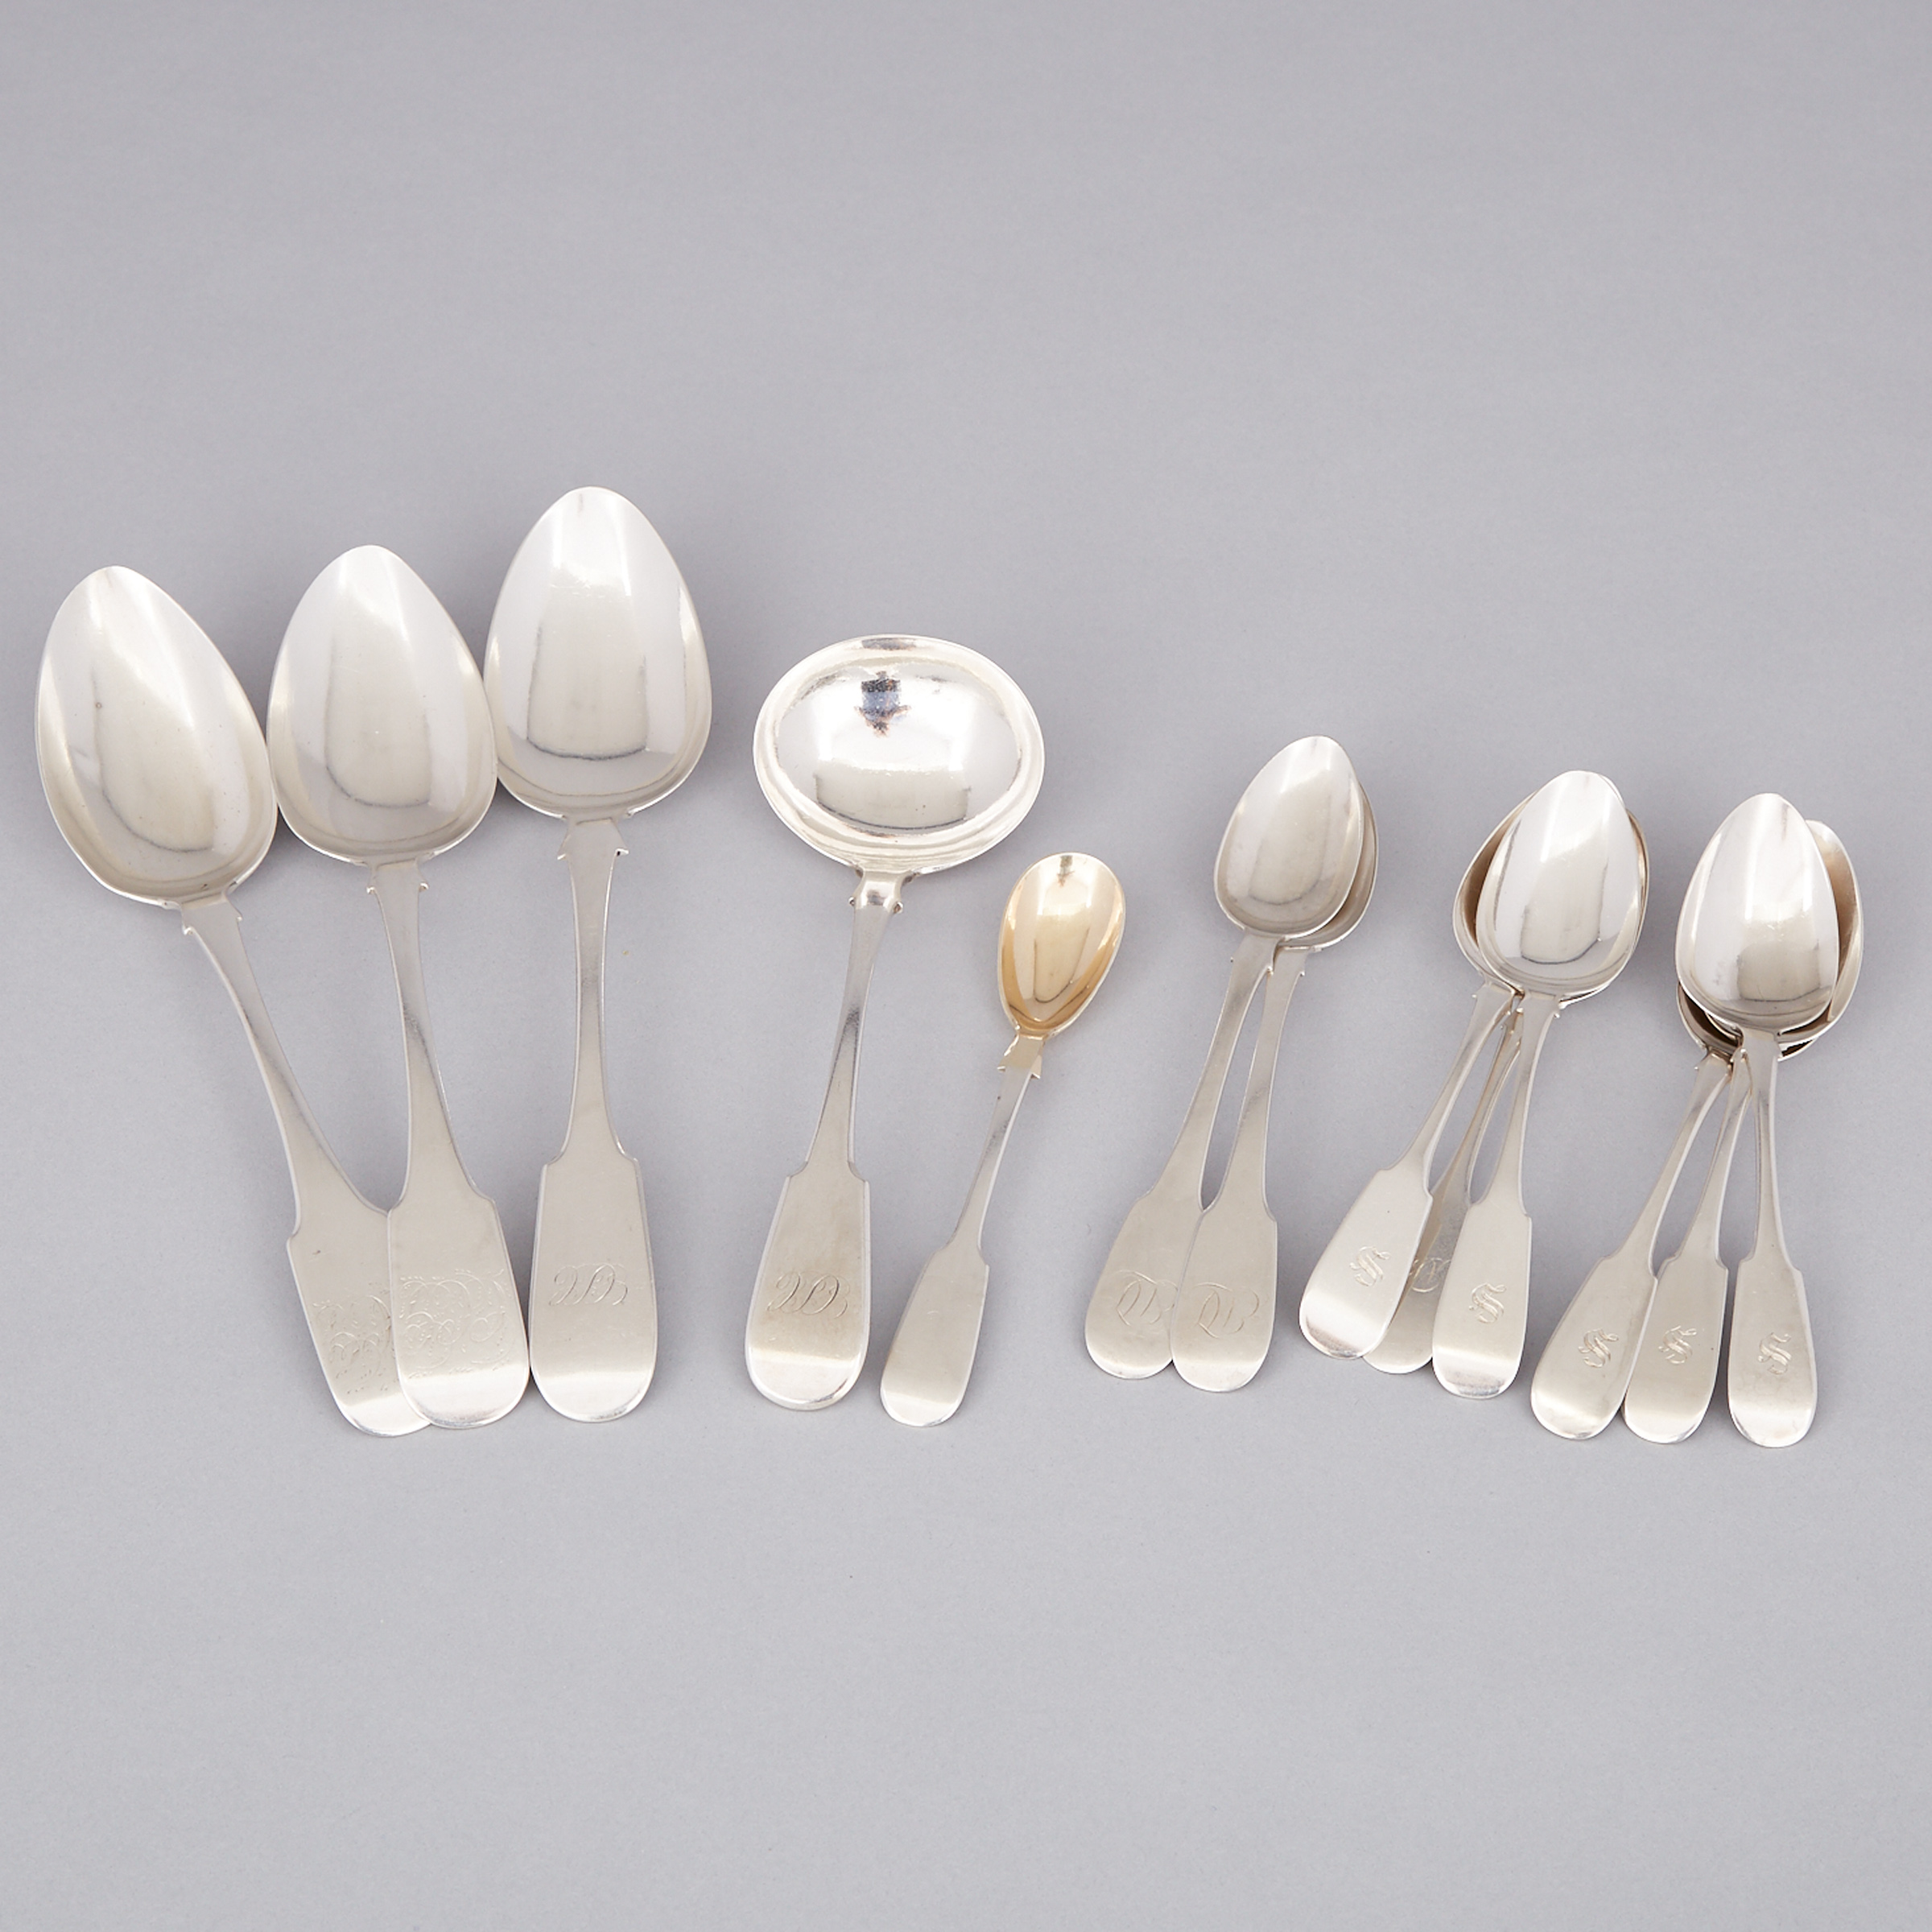 Canadian Silver Fiddle Pattern Flatware, George Savage/George Savage & Son, Montreal, Que., mid-19th century